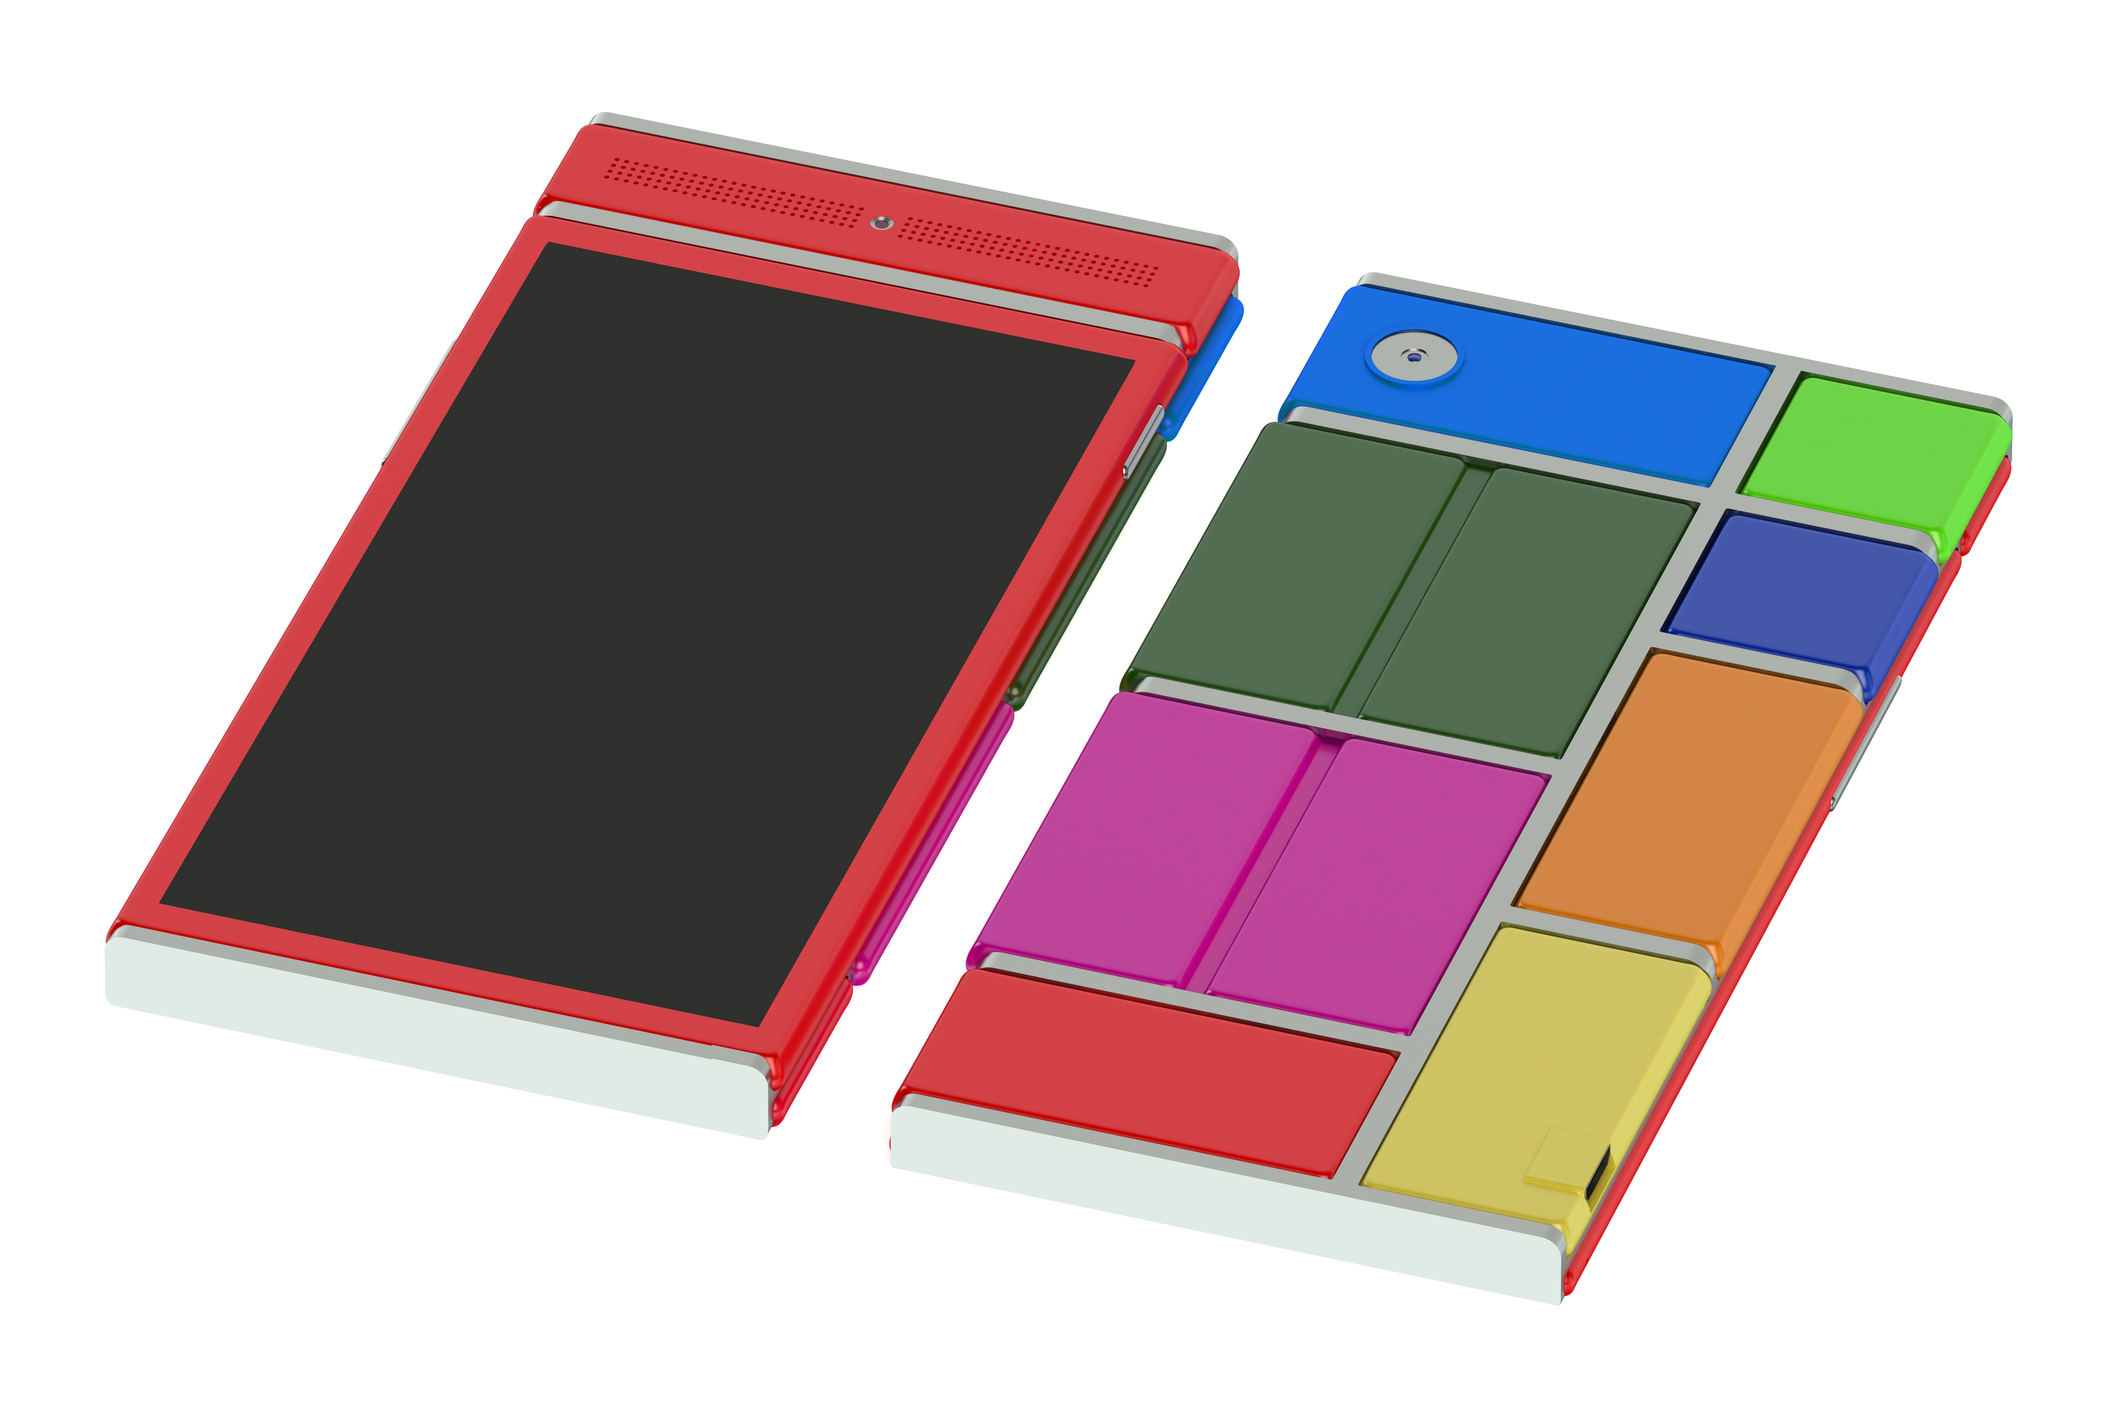 Two modular smartphones with interchangeable parts on a white background